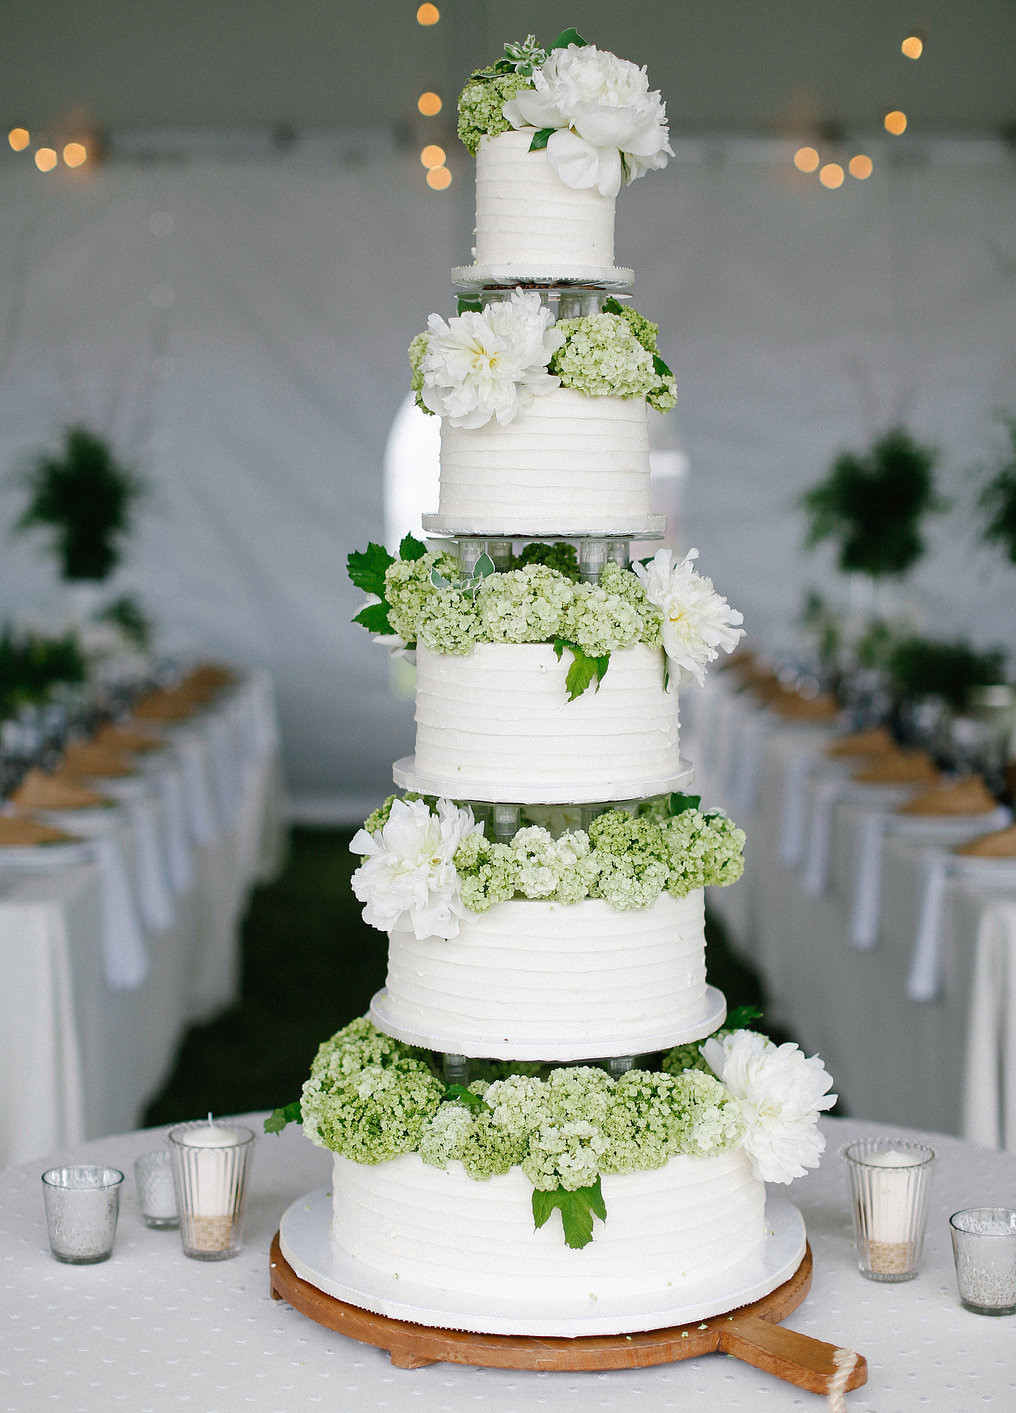 How To Decorate A Wedding Cake
 Wedding Cakes 20 Ways to Decorate with Fresh Flowers